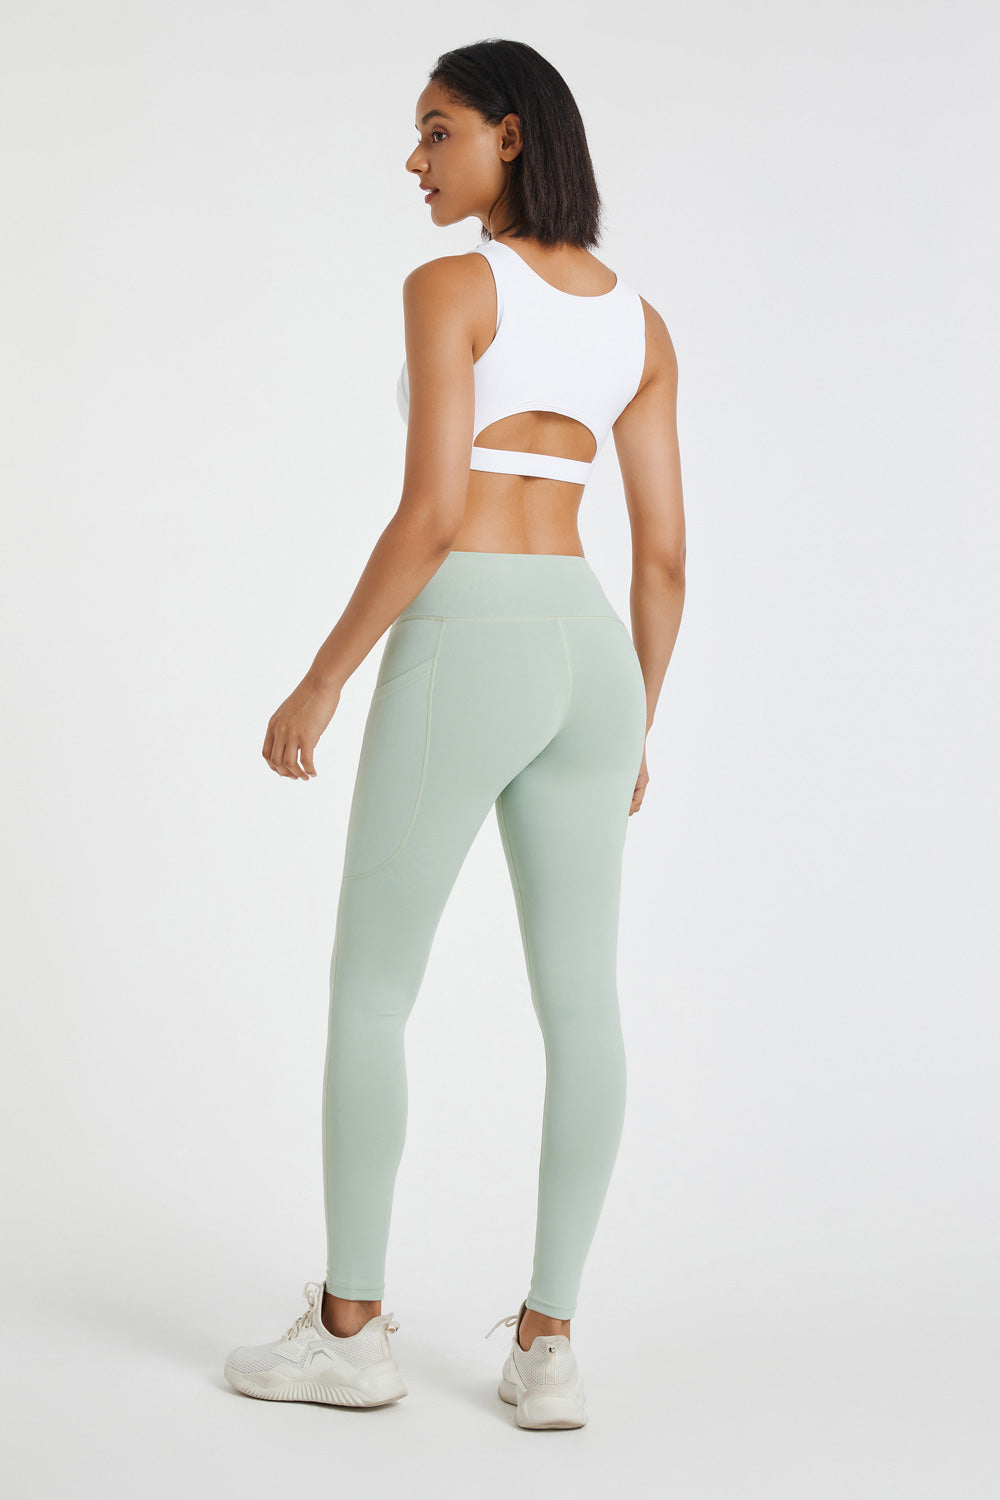 Honeycomb Technical Tights - Sage